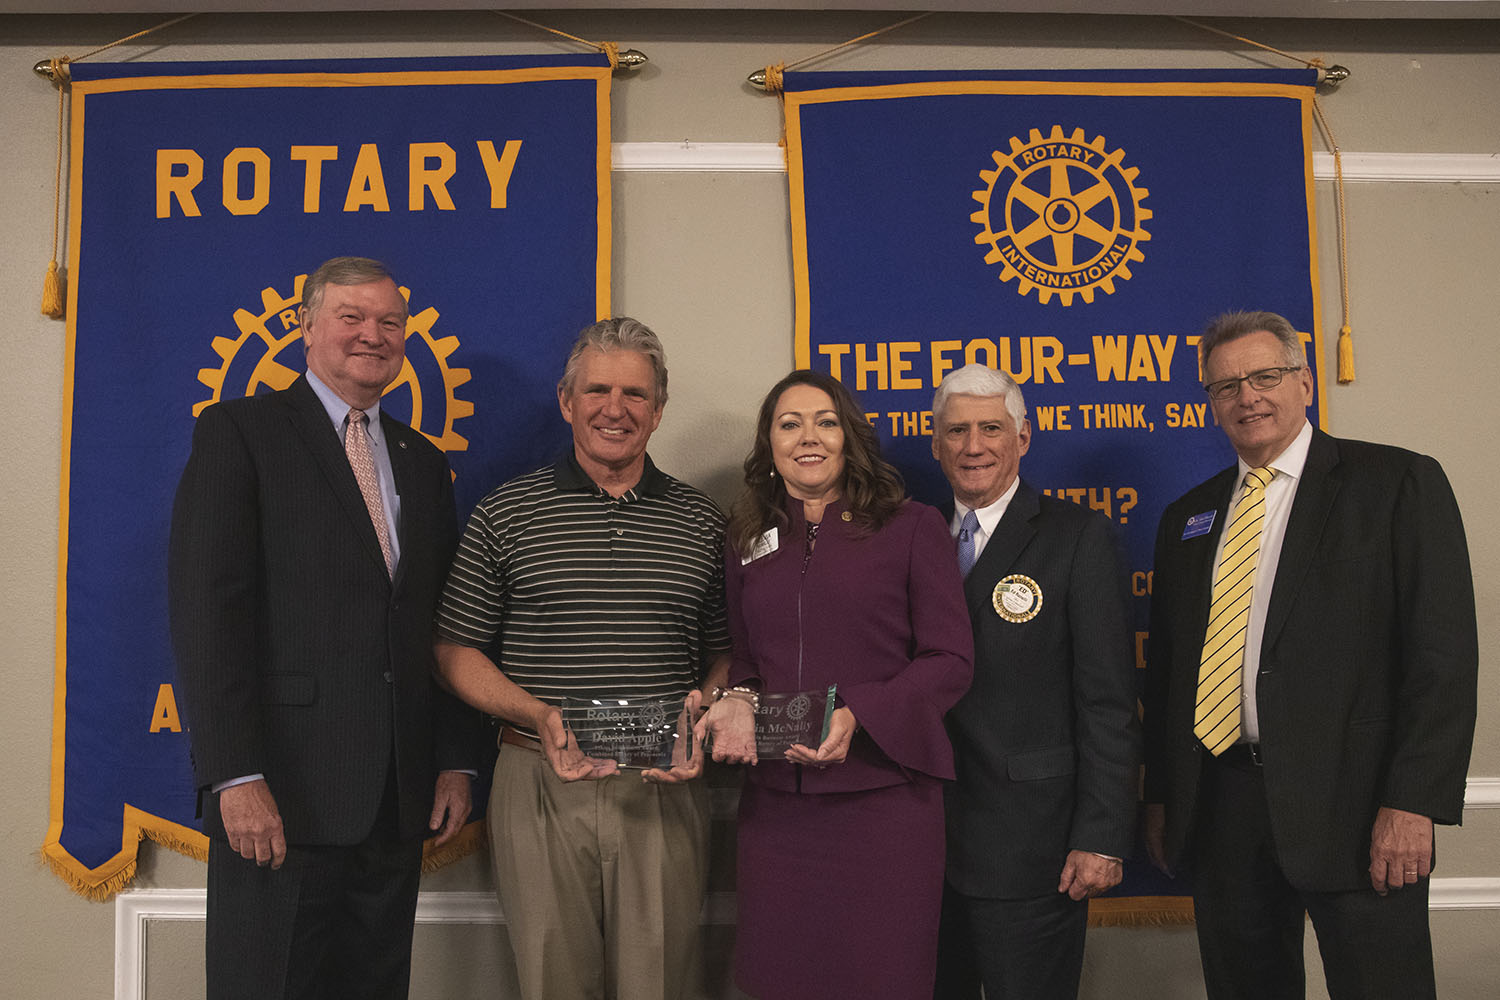 Olevia McNally and David Apple, recipients of the 2019 Ethics in Business Awards, posing for a photo with rotary leaders during the seventeenth annual event held on May 6 at New World Landing in Downtown Pensacola.